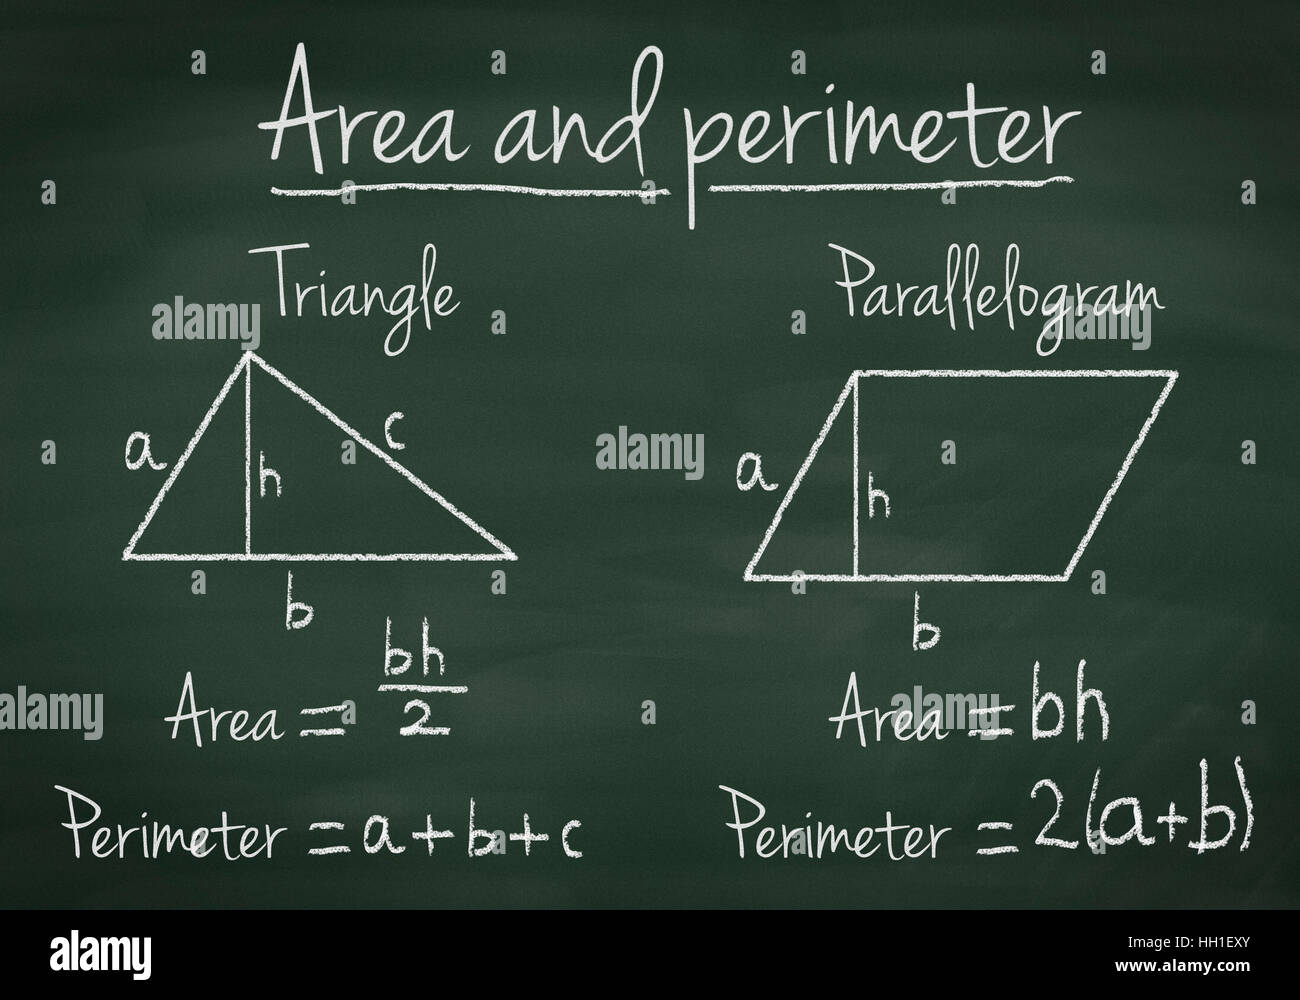 Area and perimeter of triangle and parallelogram explained on a chalkboard Stock Photo